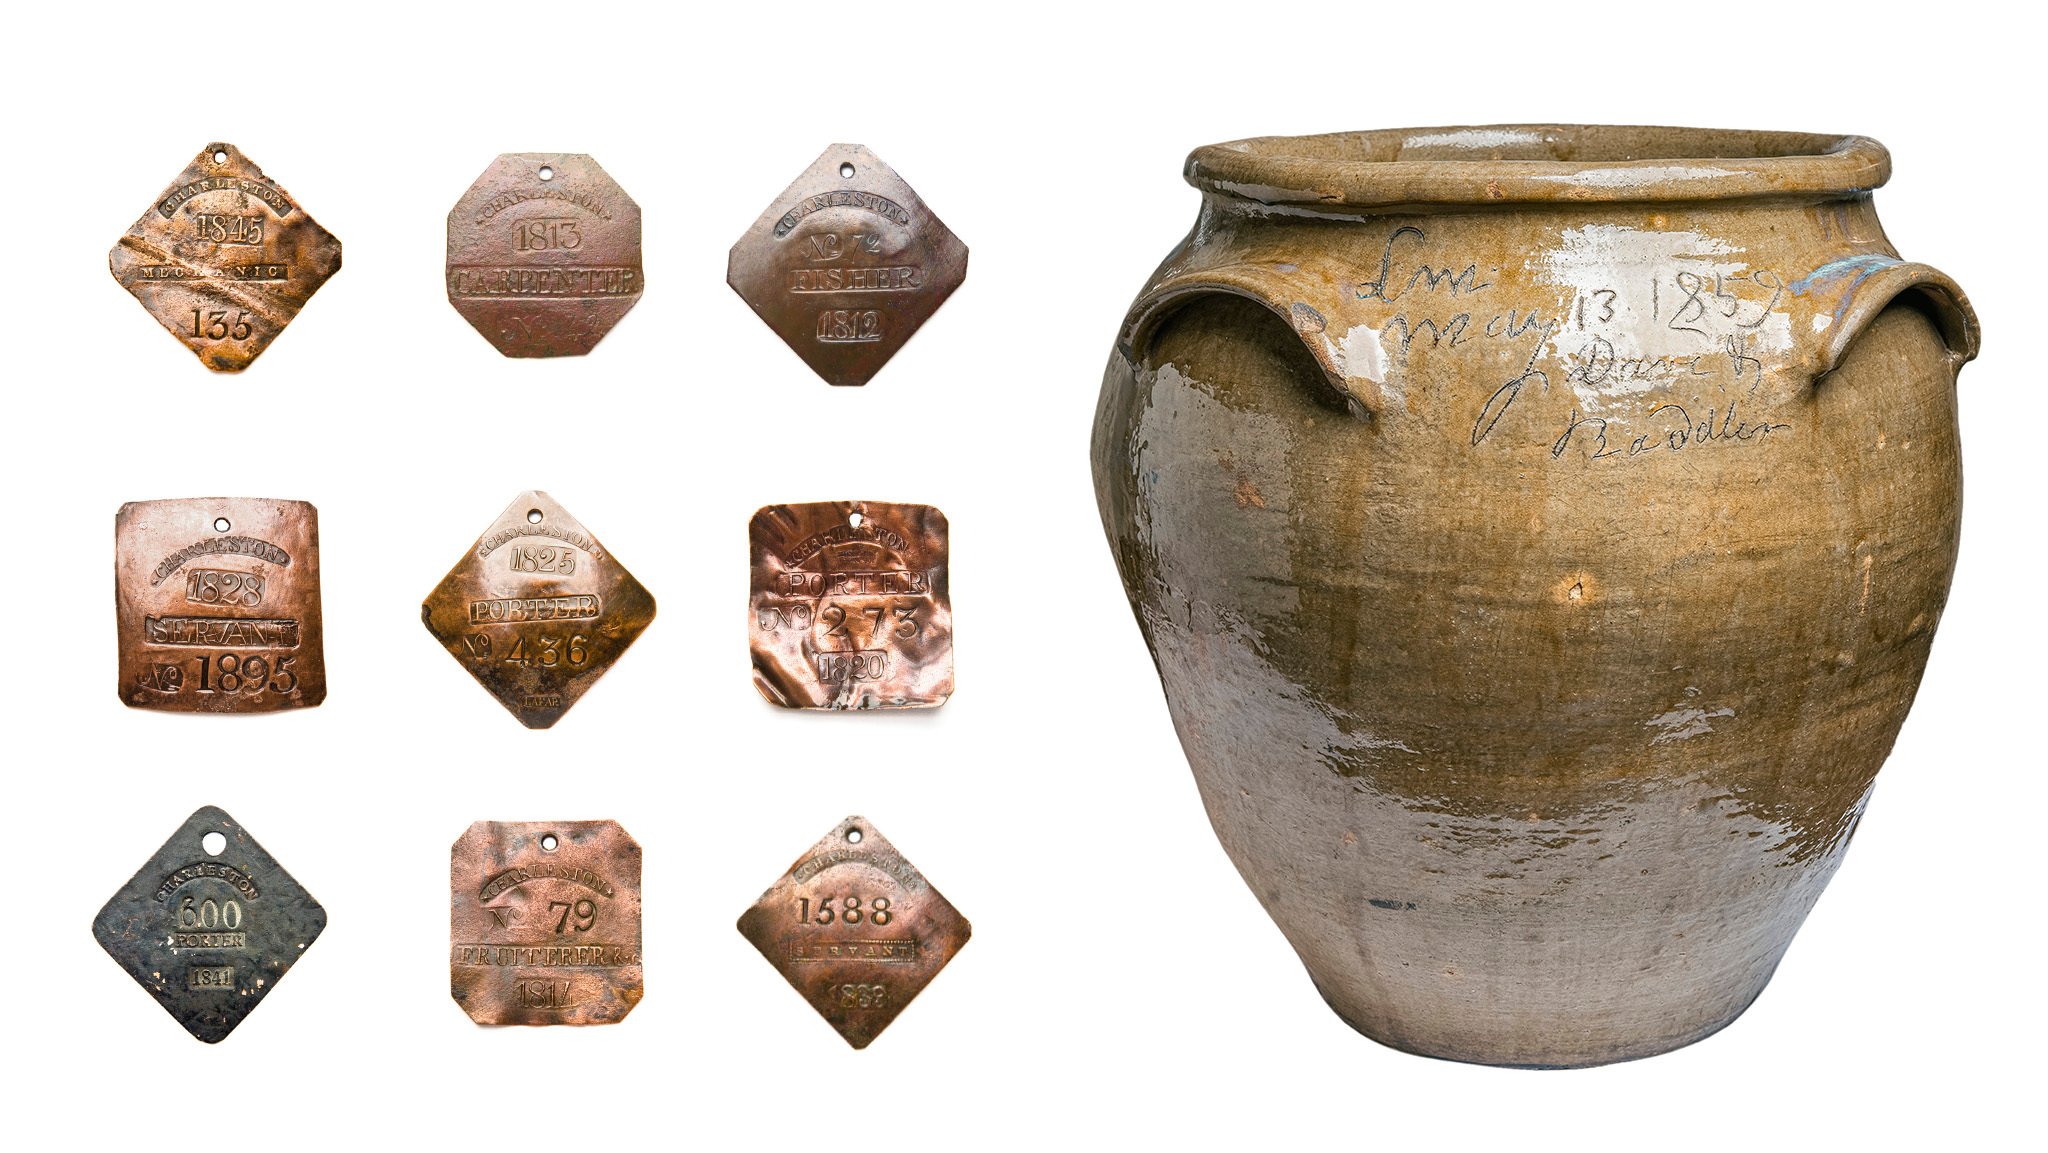 Copper slave badges were worn by enslaved people when hired out to others by their enslavers. Pottery on display exemplifies the craftsmanship of enslaved people working in the industry.